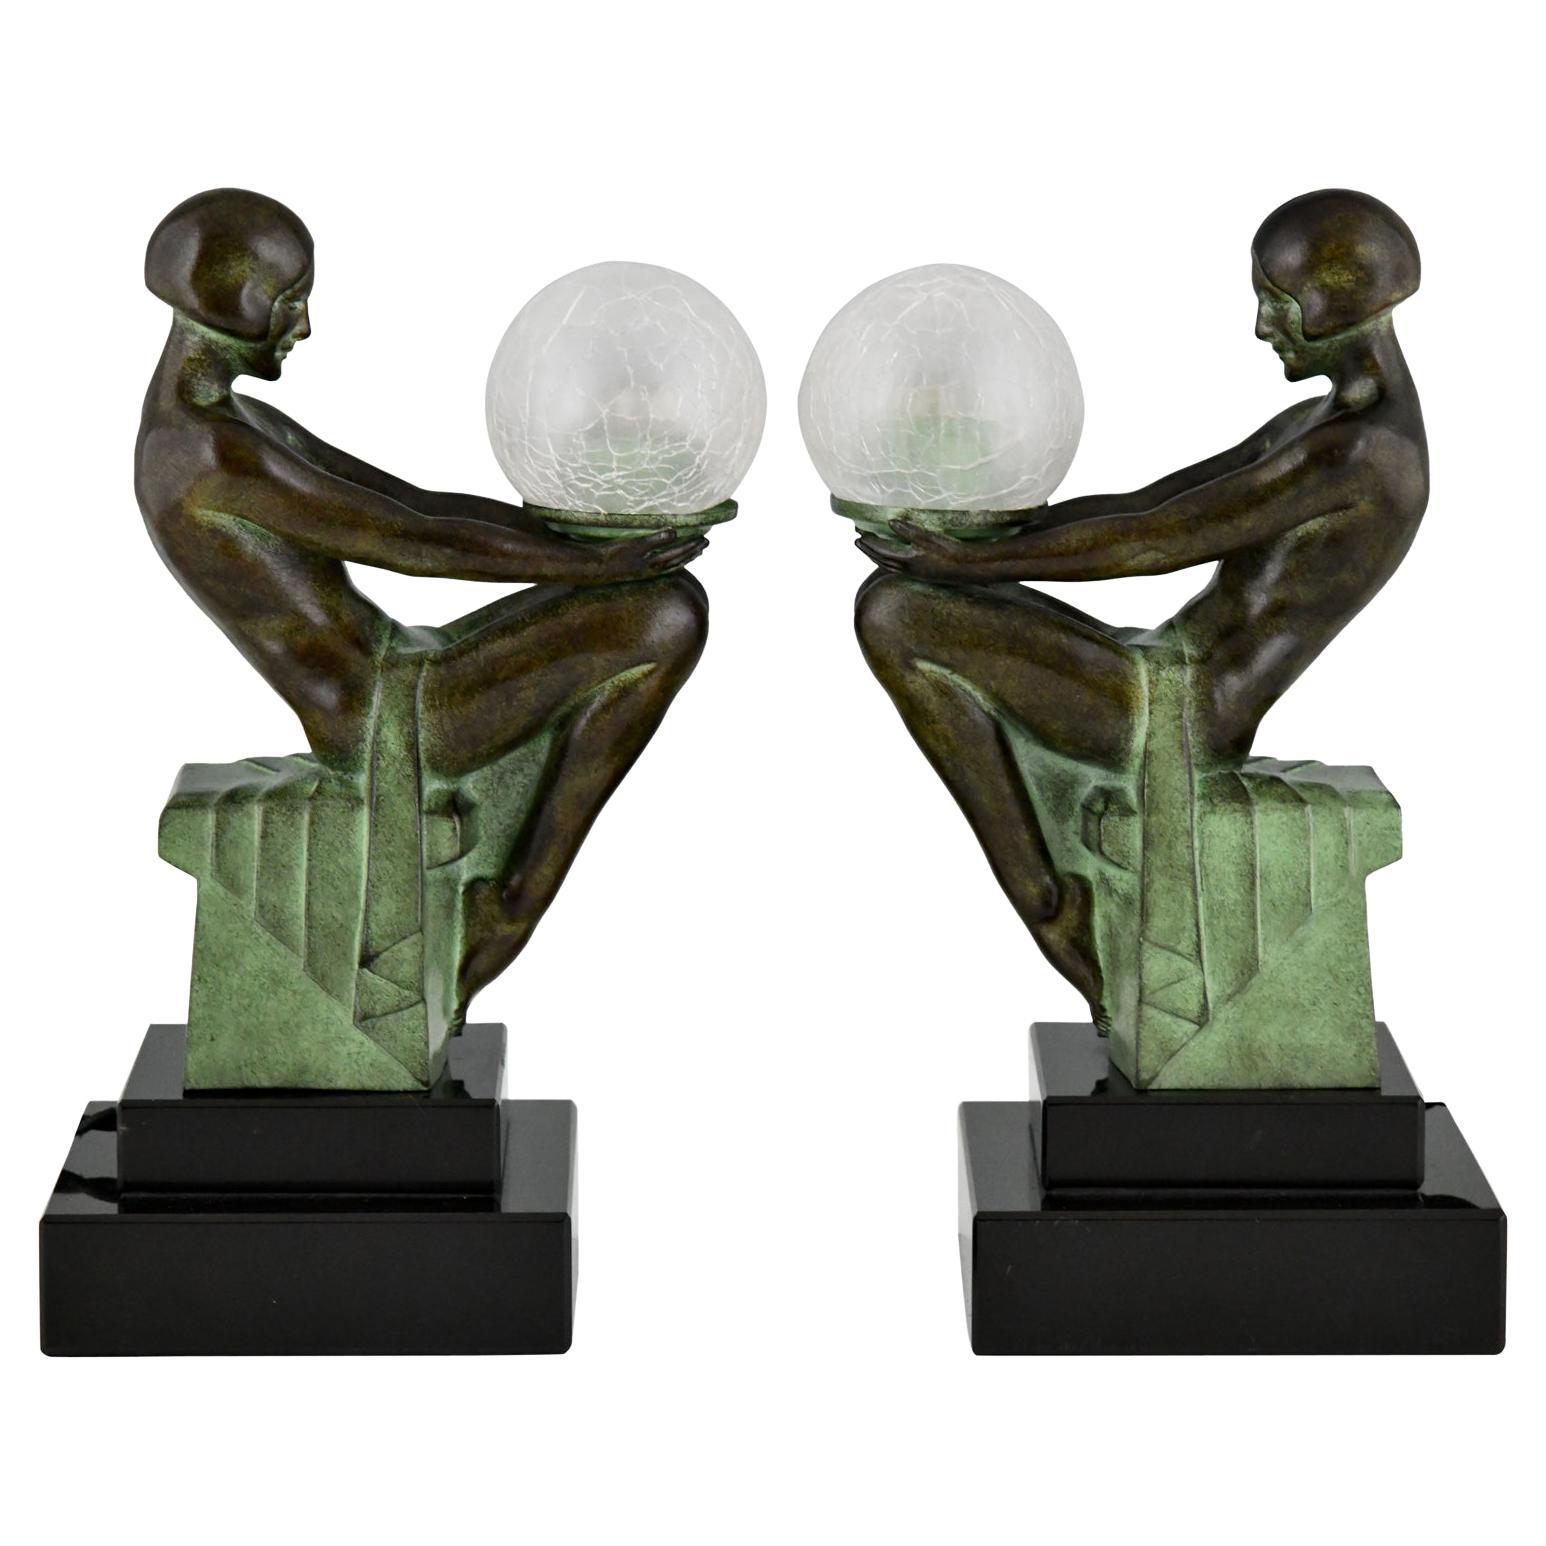 Pair of Art Deco Style Table Lamp with Seated Nudes by Max Le Verrier For  Sale at 1stDibs